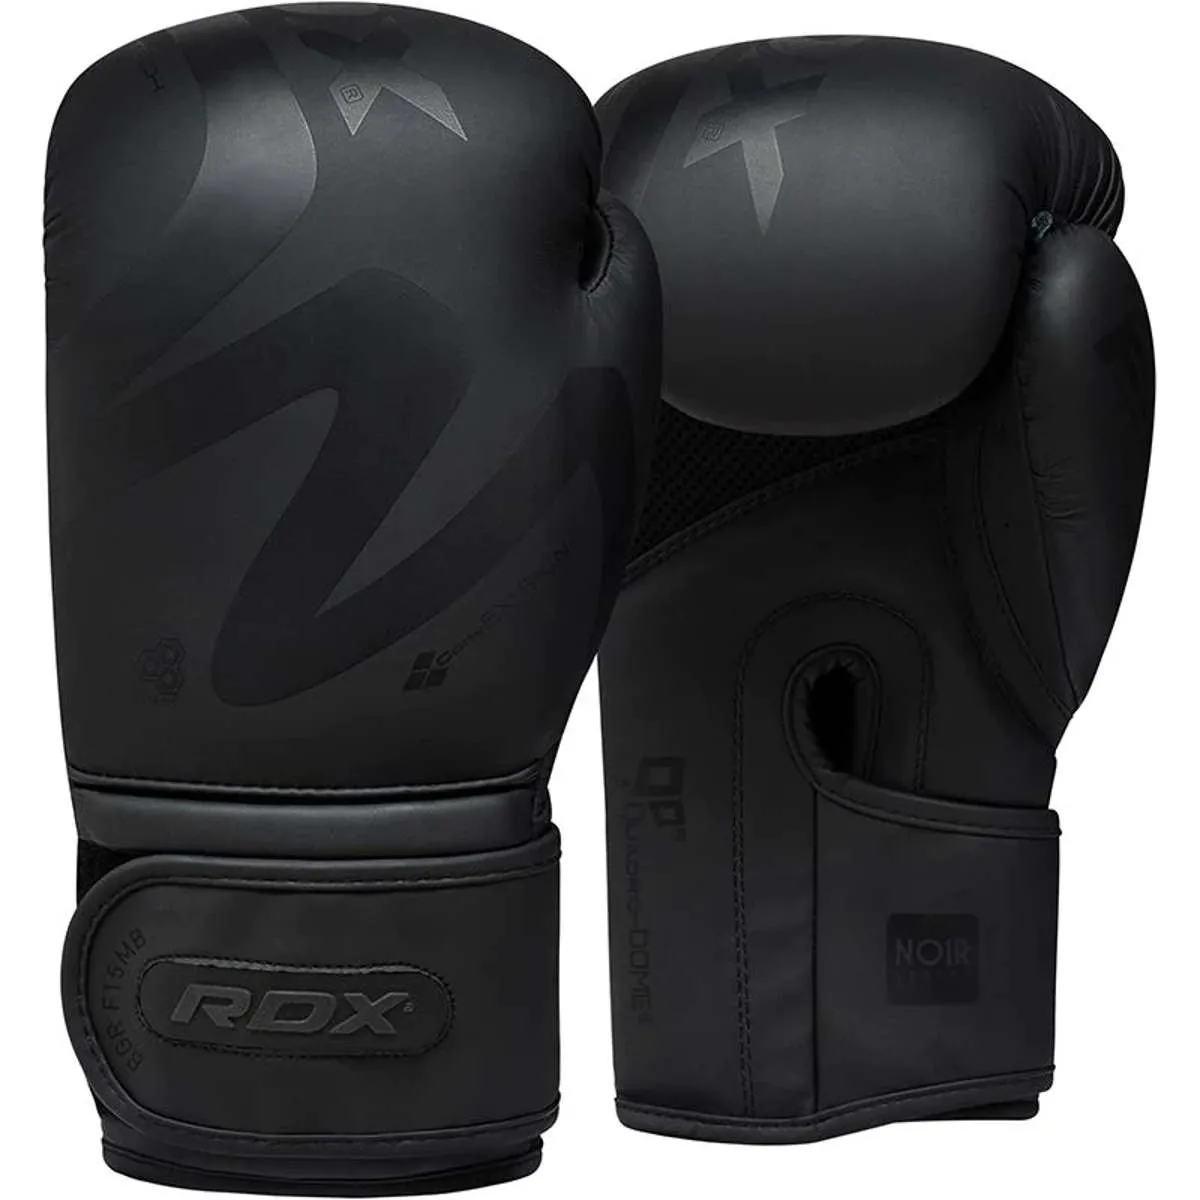 RDX Noir Boxing Gloves Training in Black Synthetic Leather